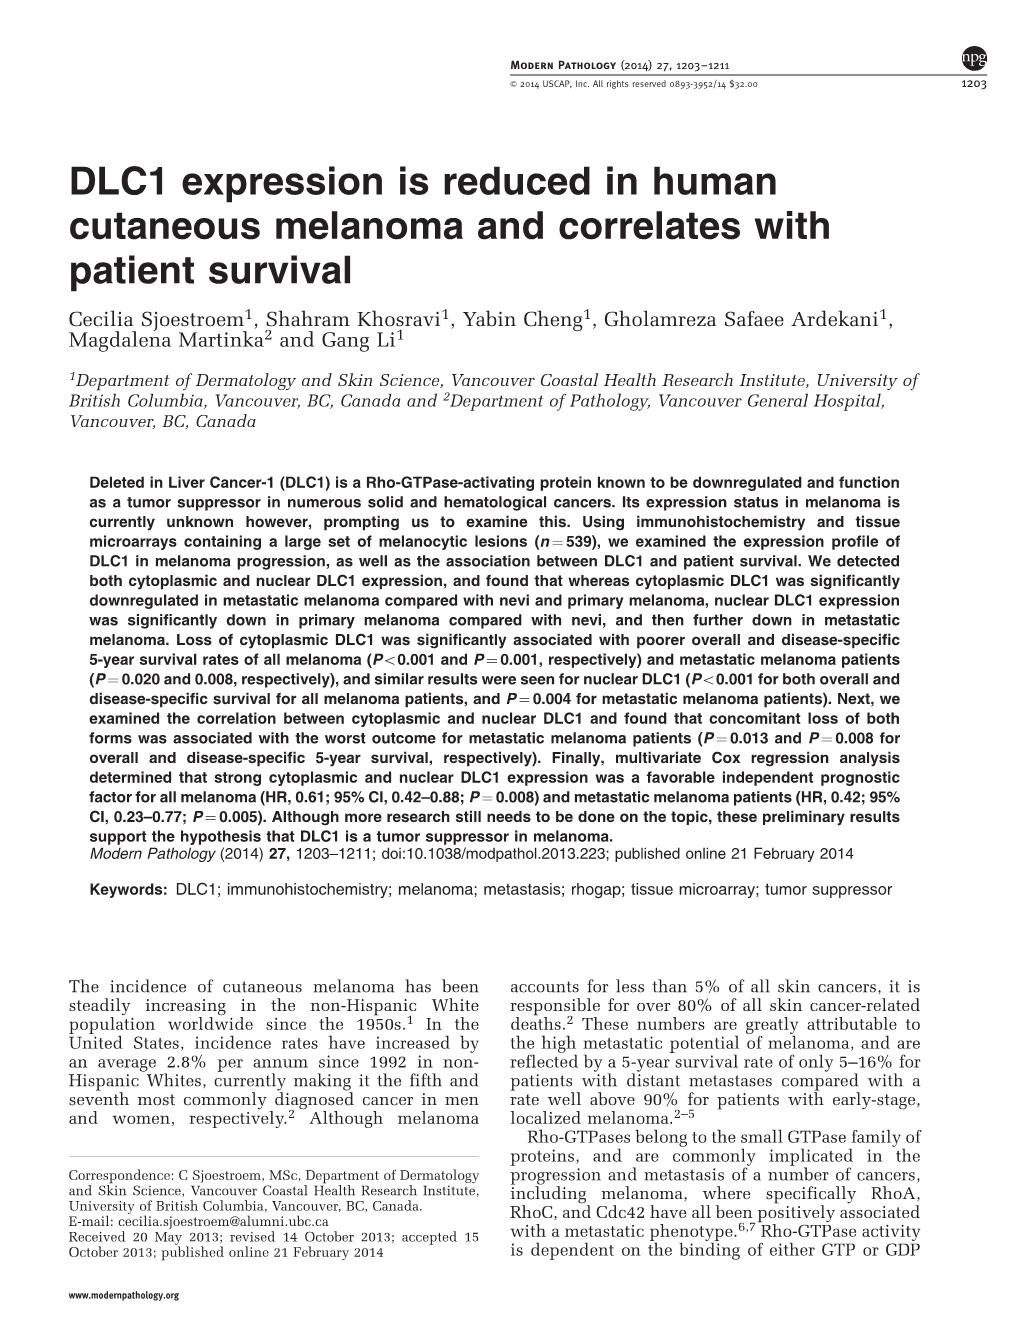 DLC1 Expression Is Reduced in Human Cutaneous Melanoma And